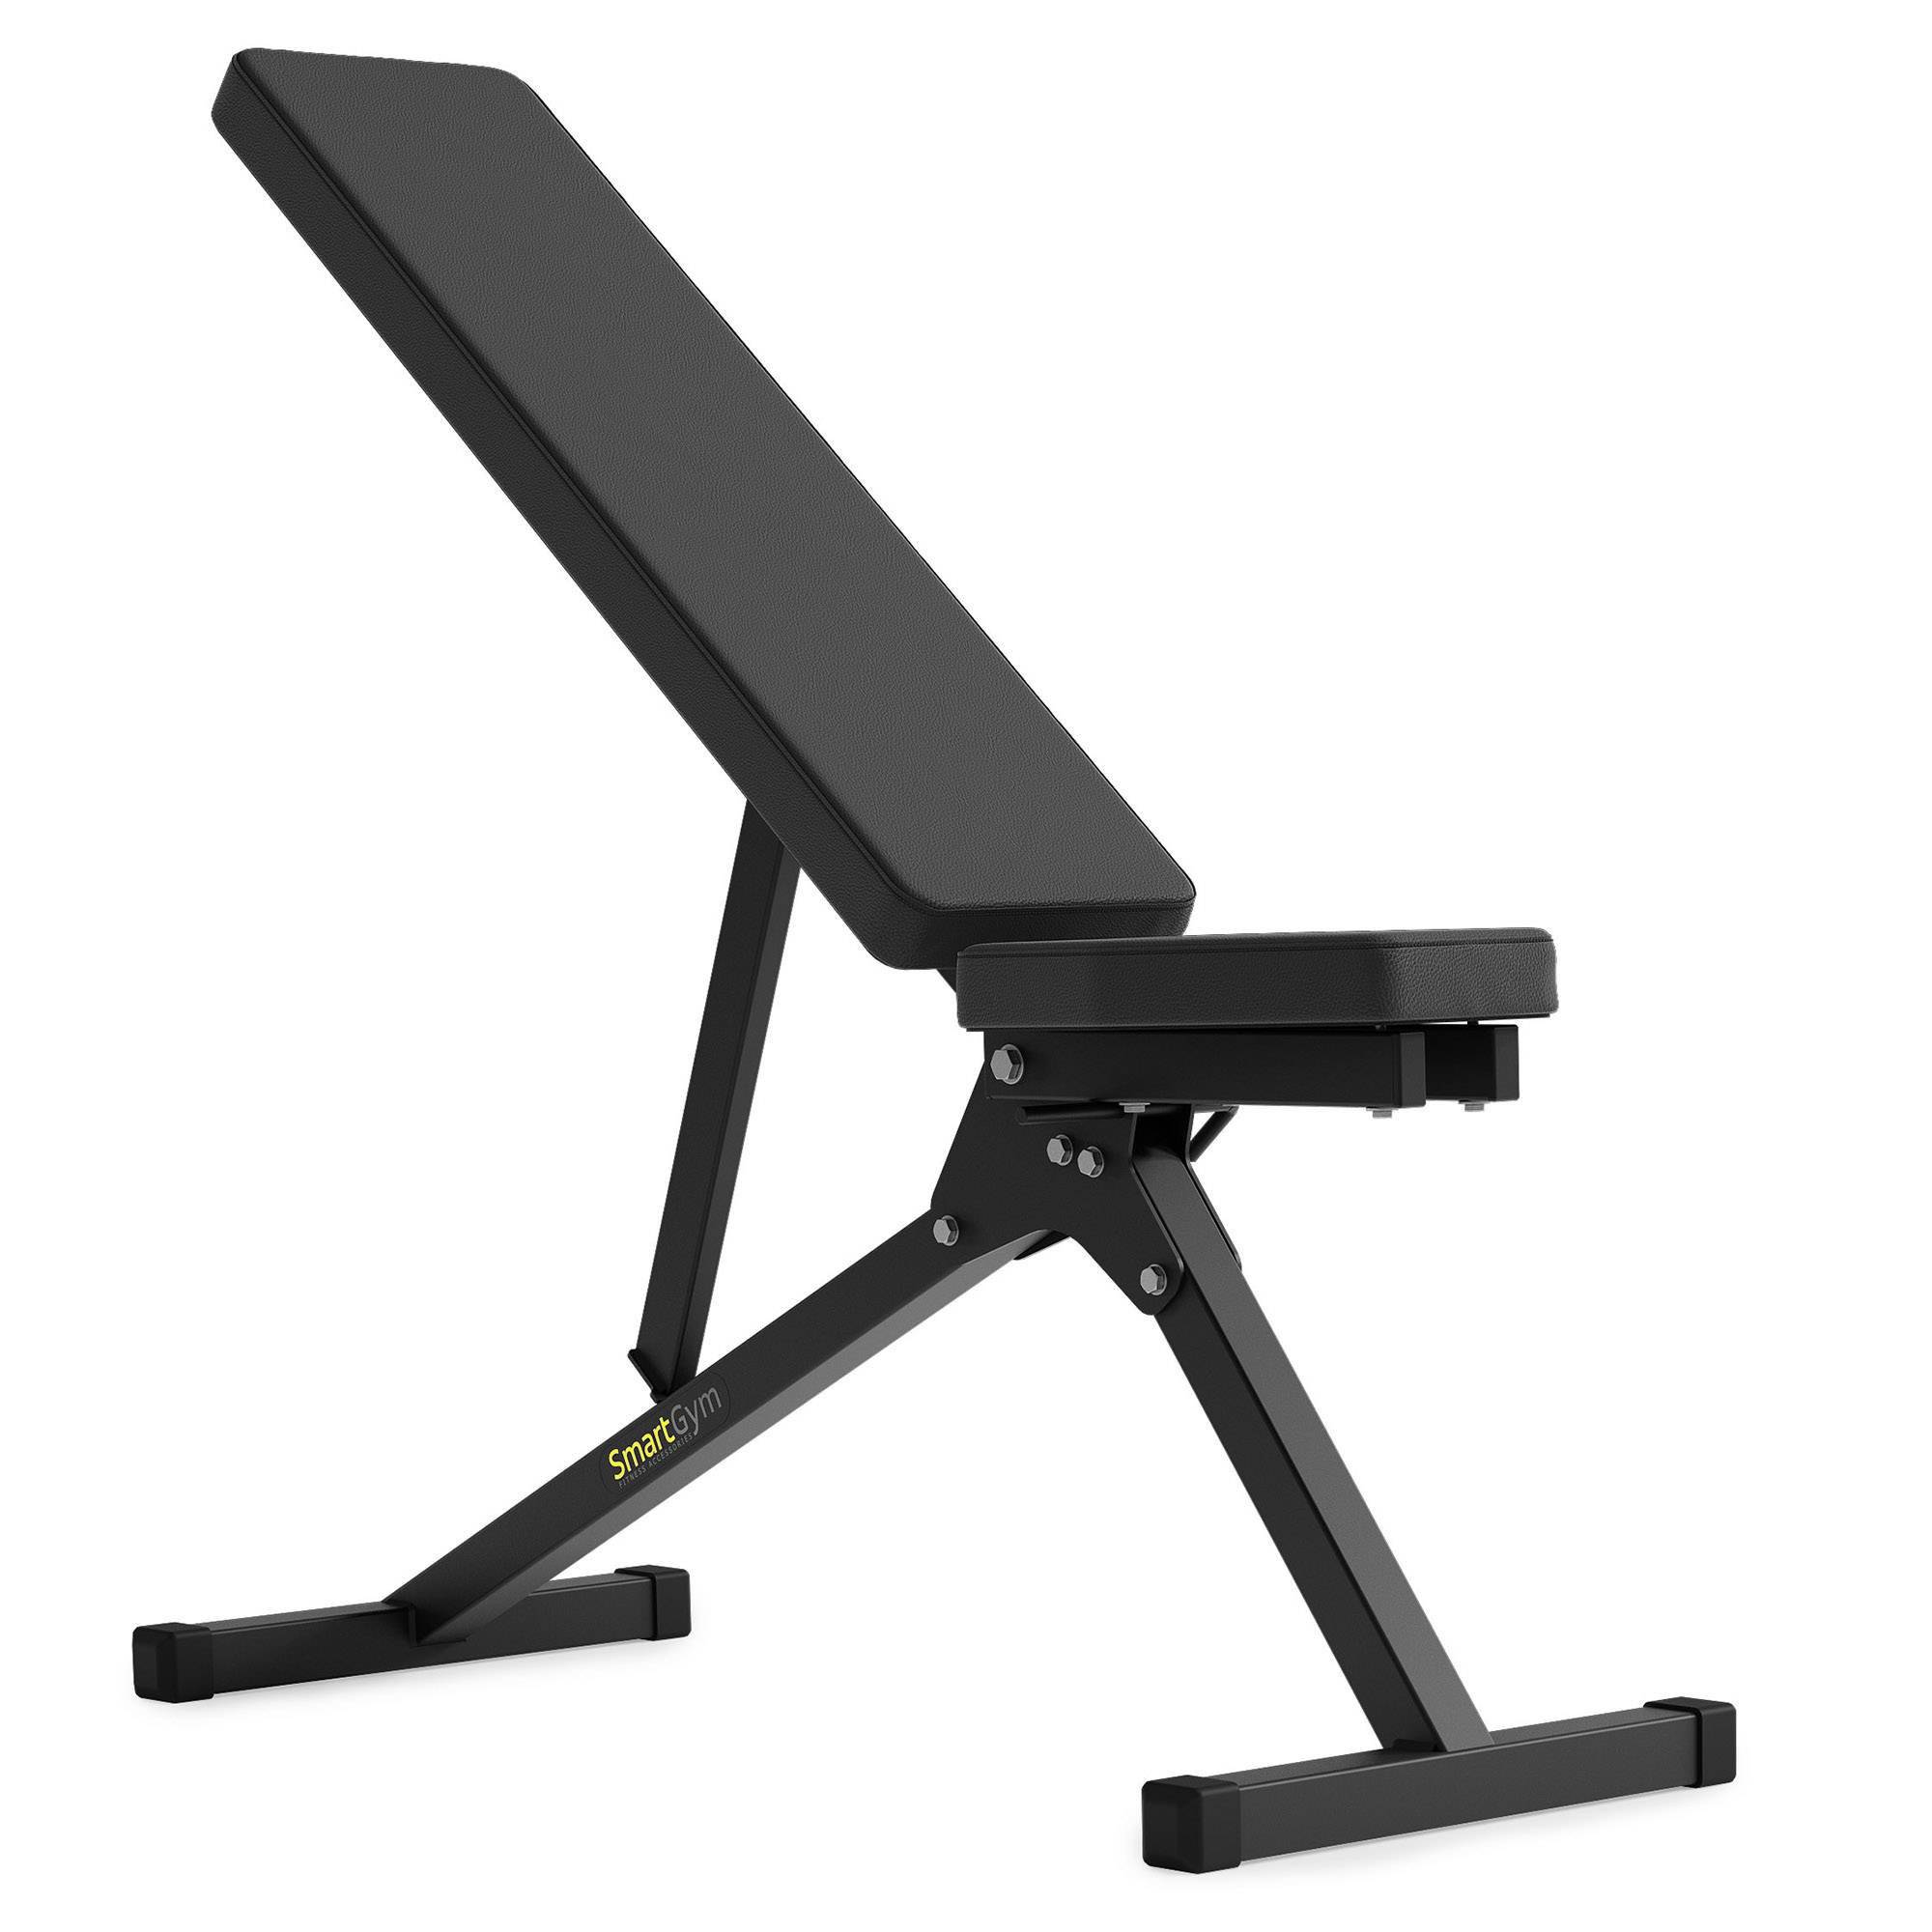 Adjustable bench SG-11 - SmartGym Fitness Accessories | Strength equipment  \ Training benches \ Benches